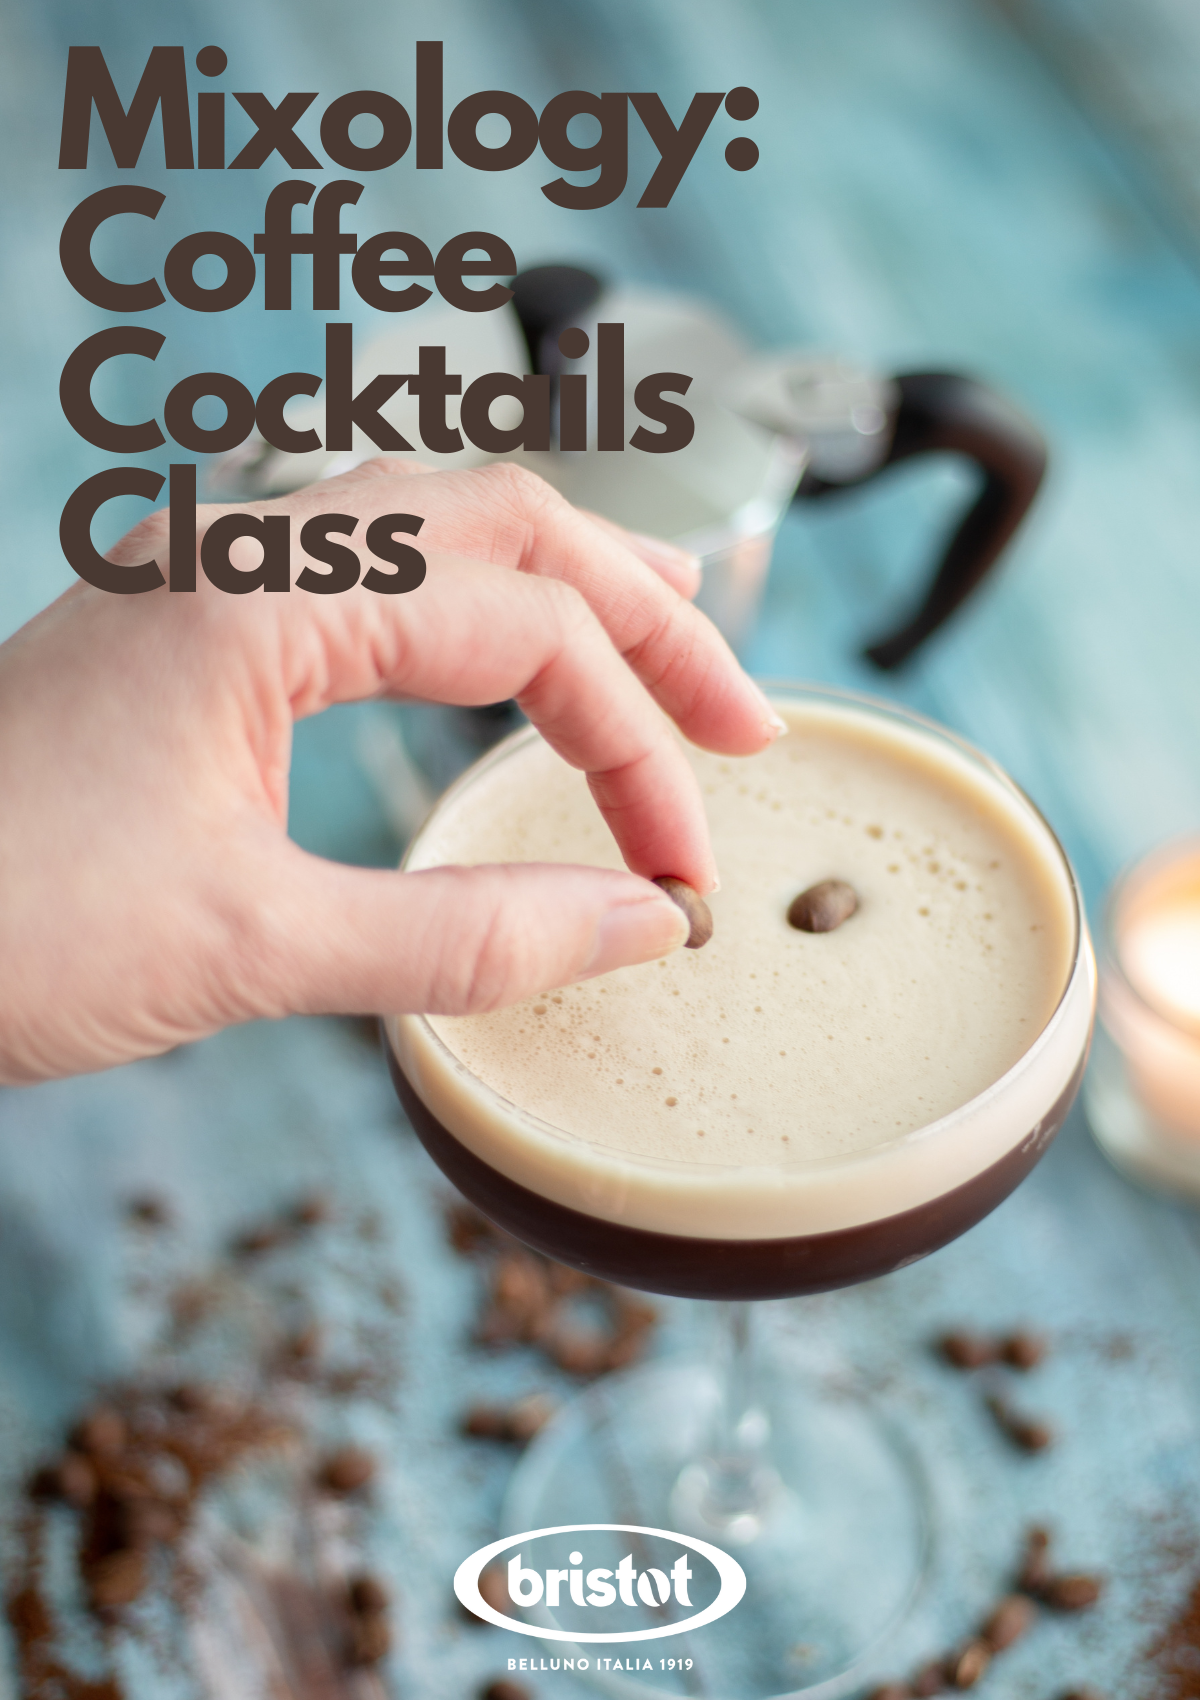 Mixology: Coffee Cocktails Class